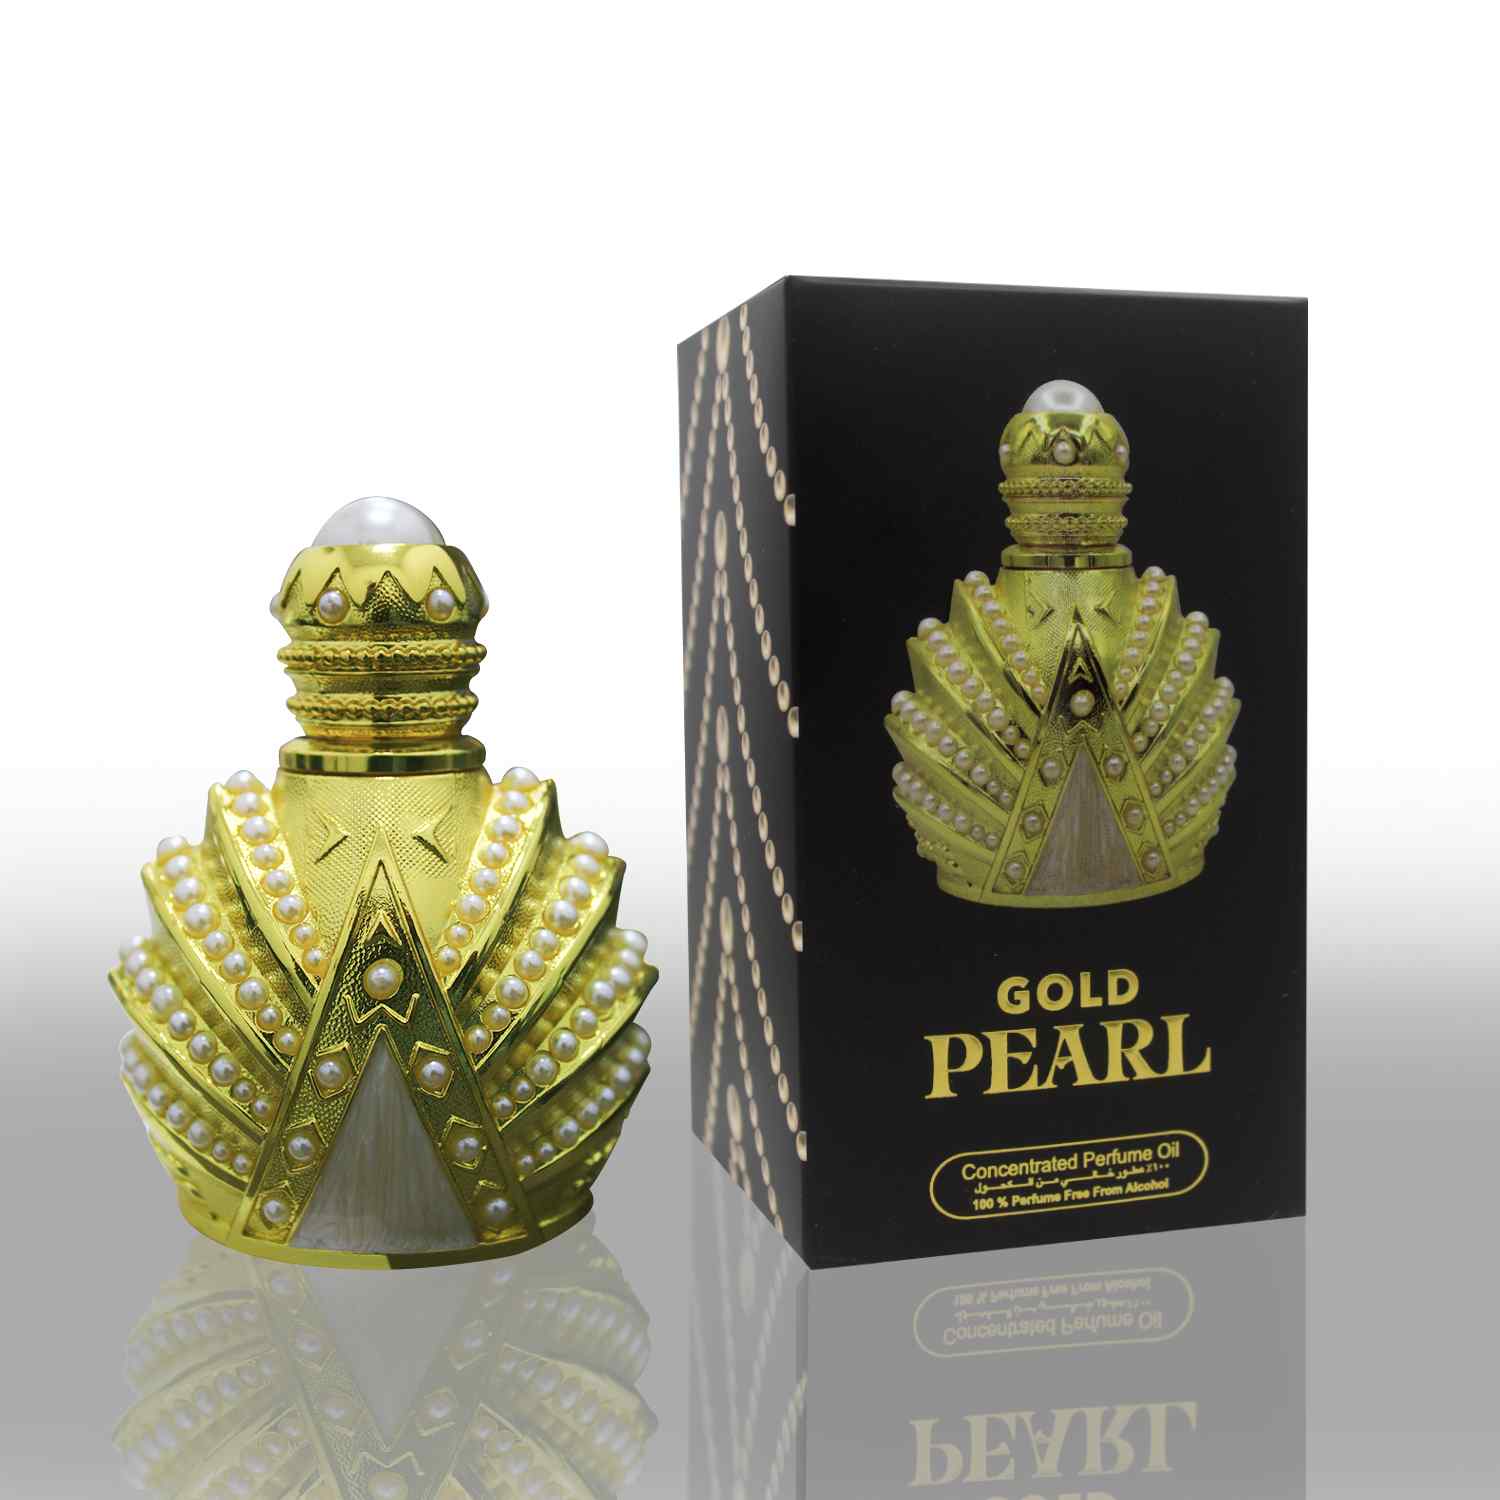 Gold Pearl attar which is concentrated perfume oil manufactured by ARD PERFUMES